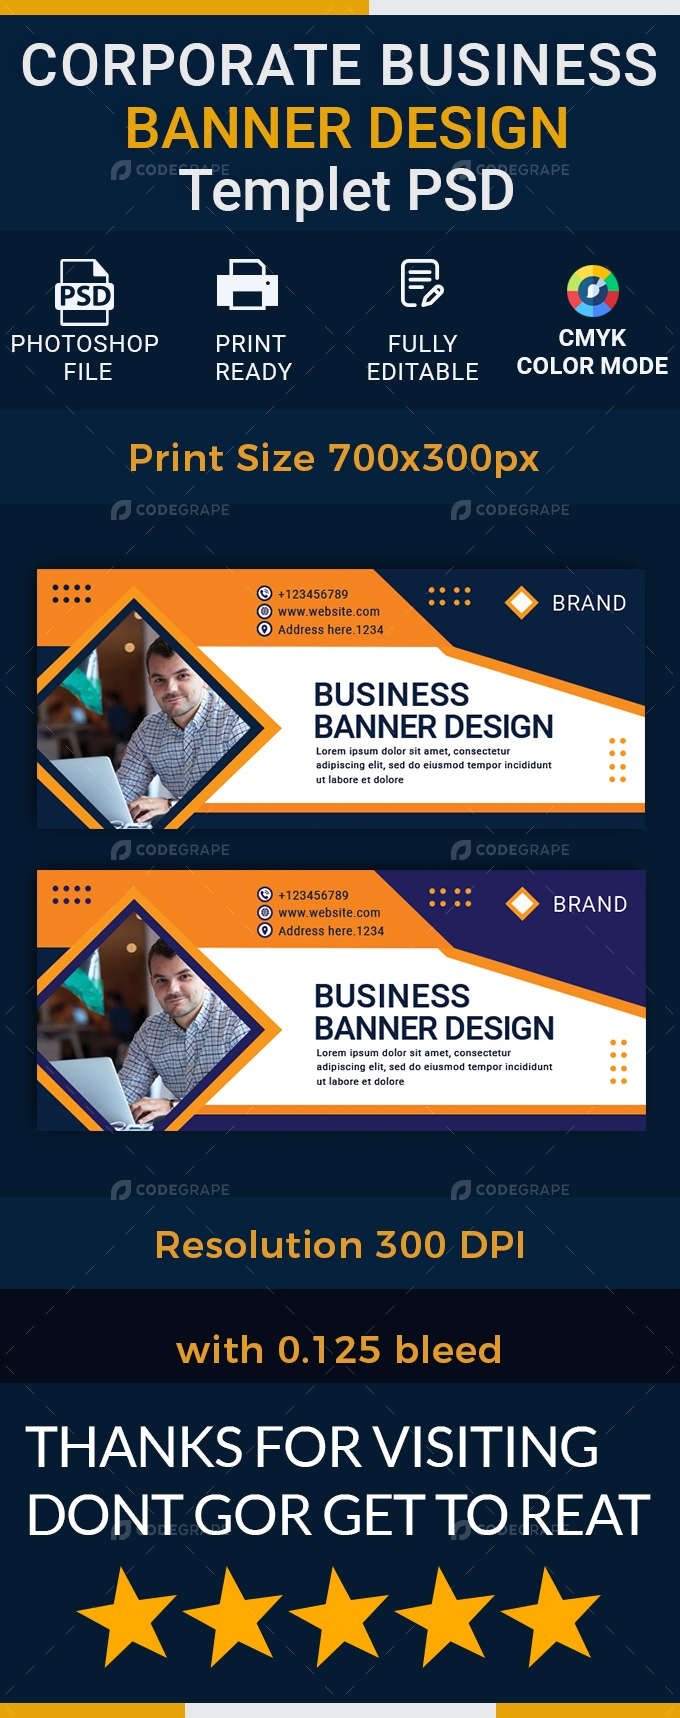 Corporate Business Banner